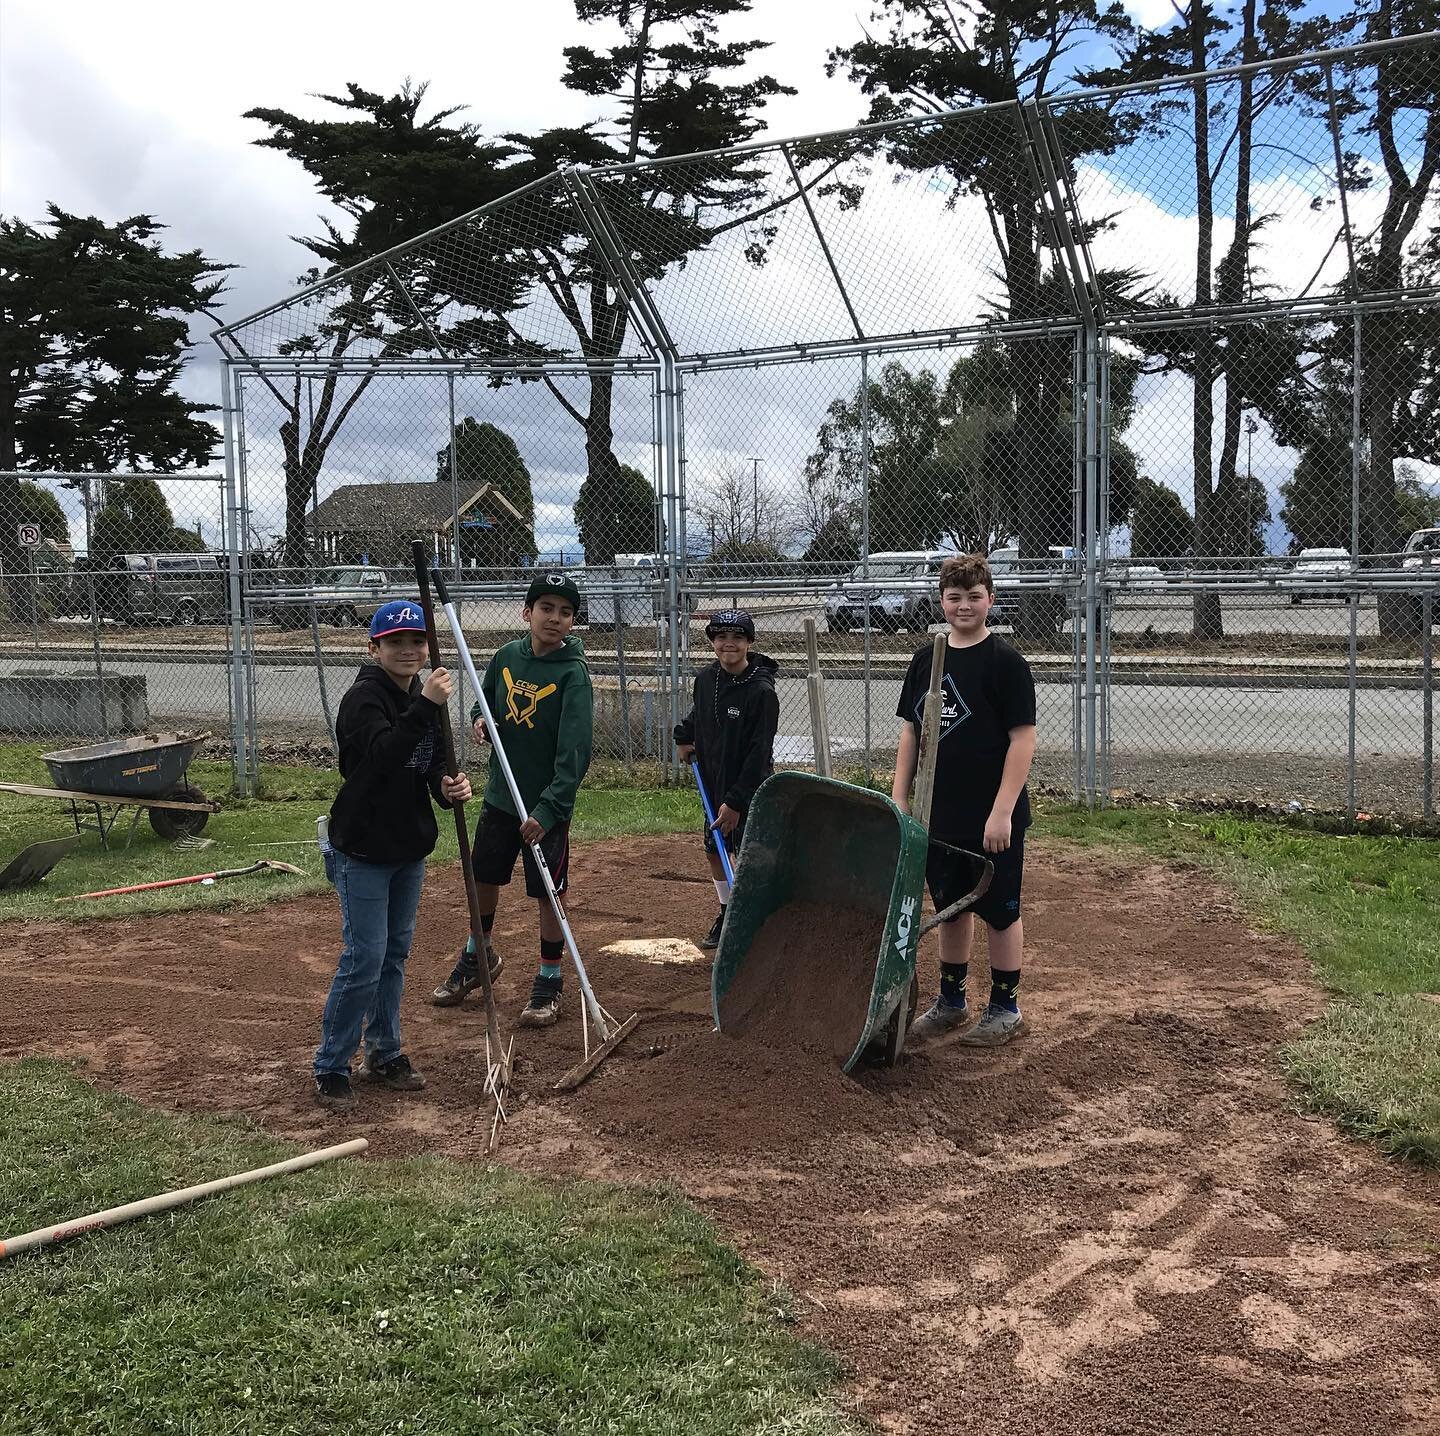 Time flies. CCYB celebrated its 10th season of the League this past summer. This was a reminder of some our boys now teenagers helping prep a field. Post some of your favorite pics recent or old and tag us in them so we can share!